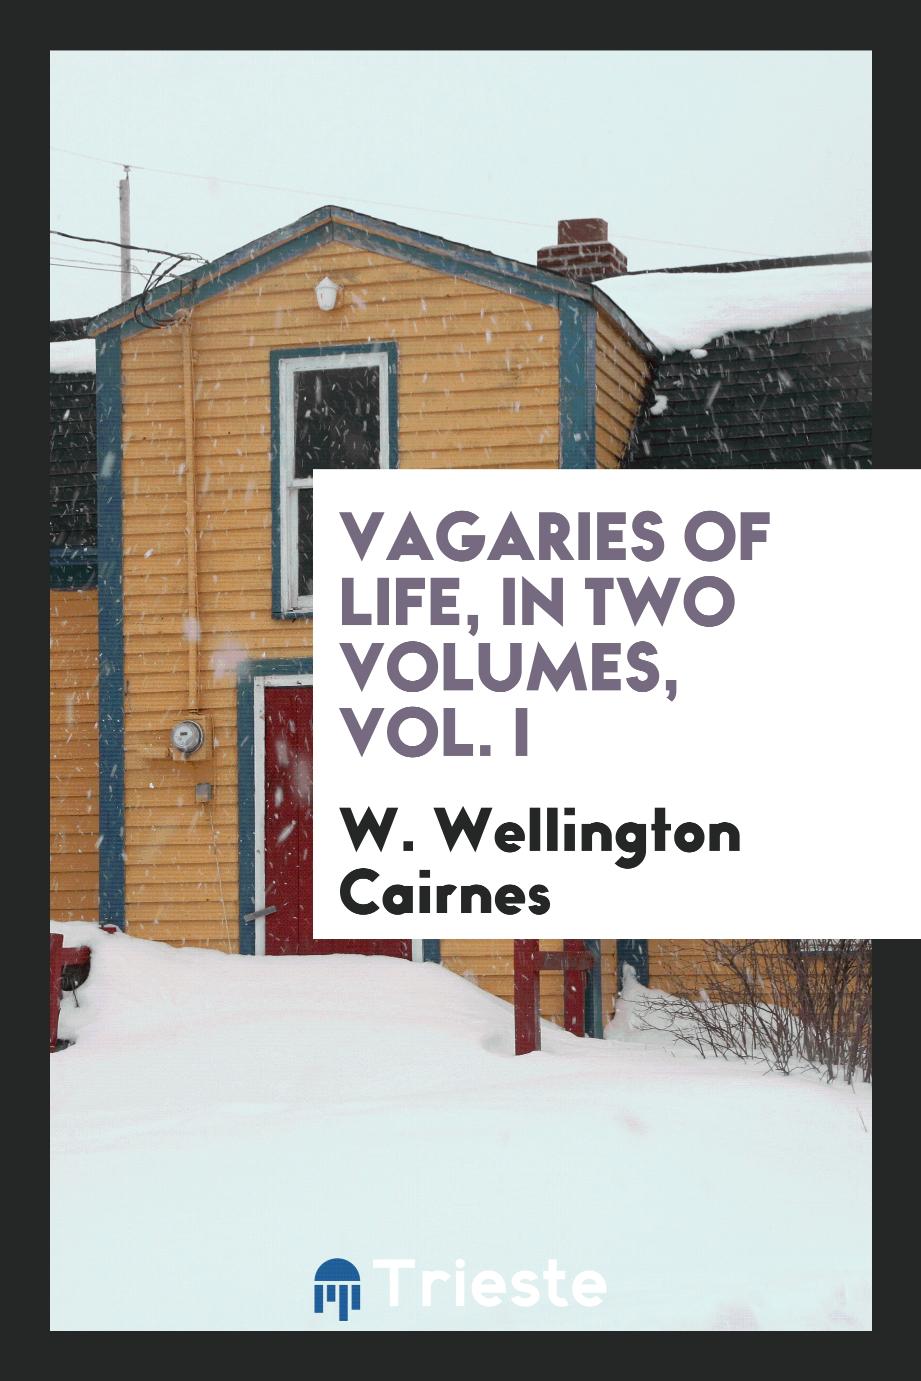 Vagaries of life, in two volumes, Vol. I